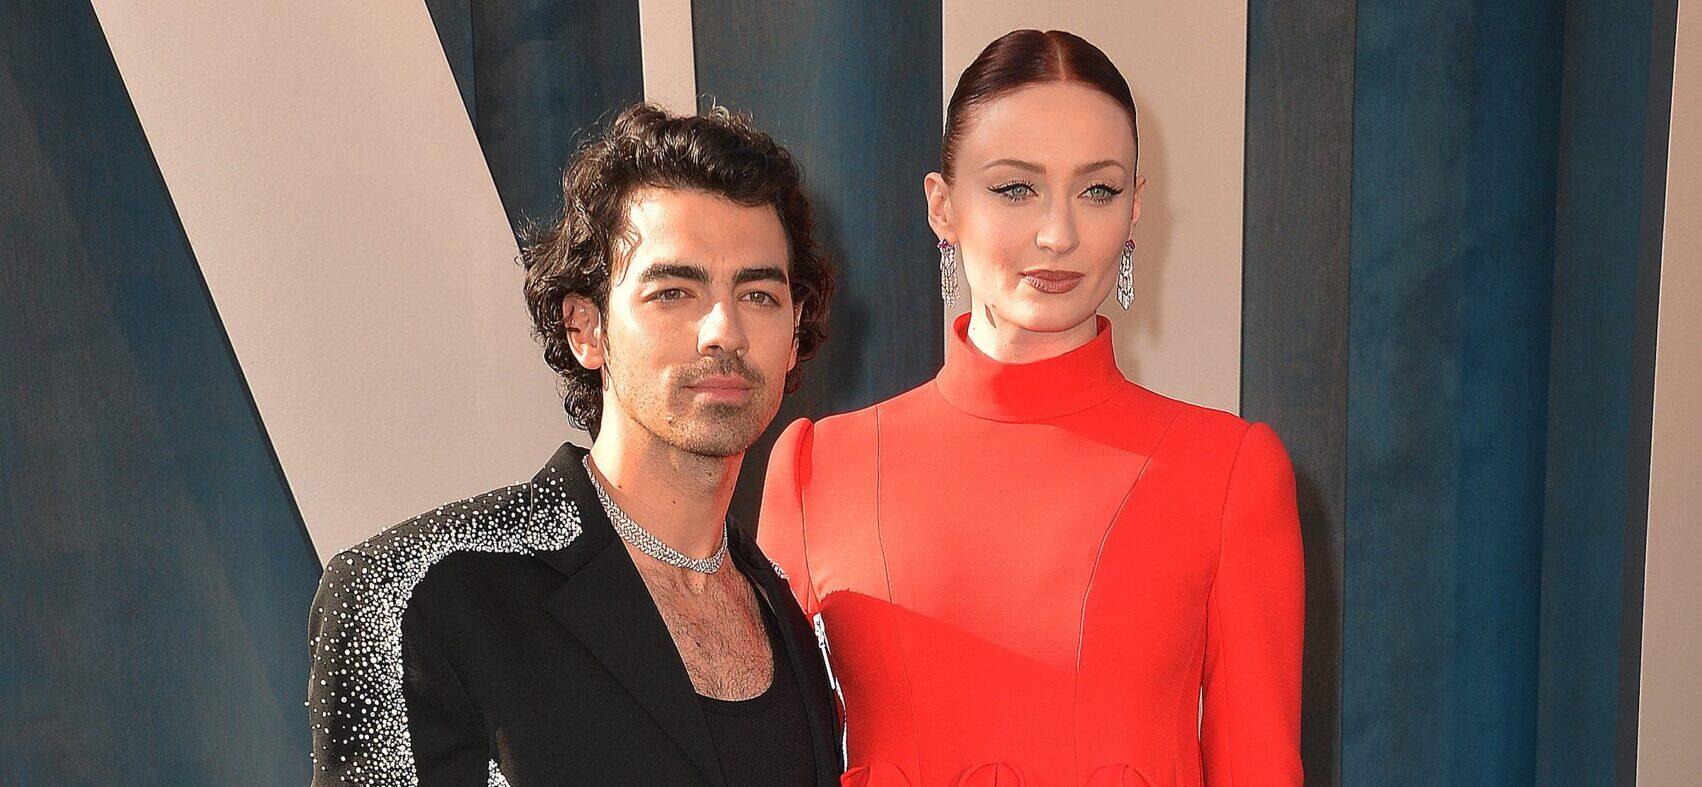 Sophie Turner Wants Followers To Stop Sharing The Leaked Video Of Her Children With Joe Jonas